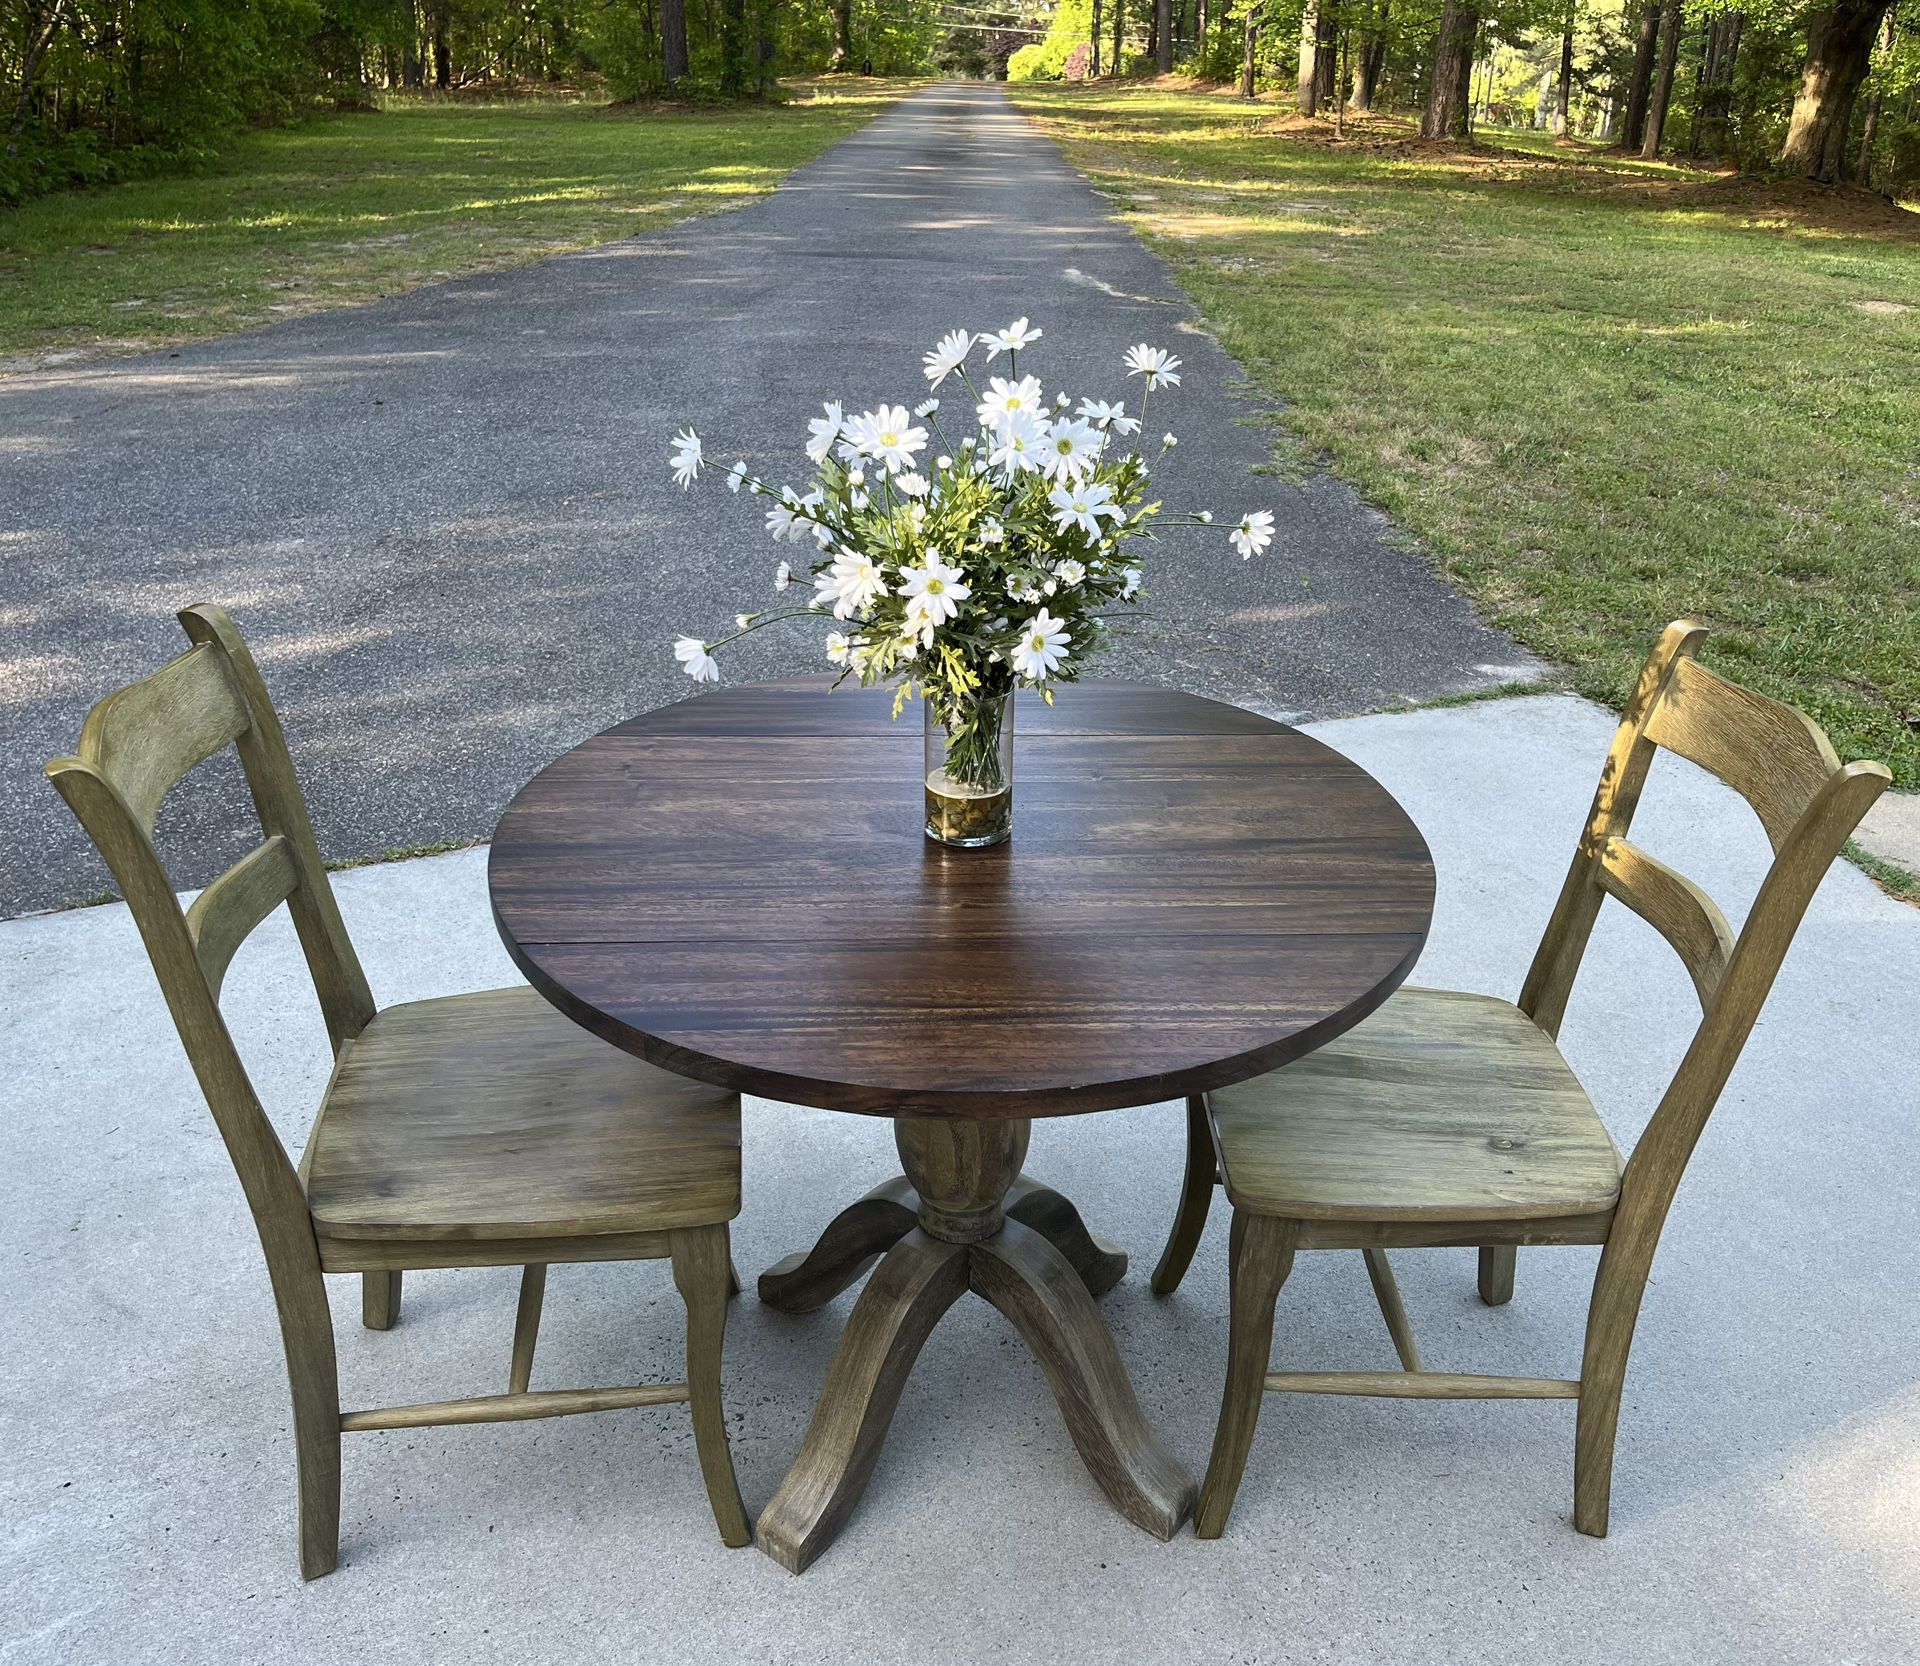 3’ Solid Hardwood Round Dropleaf Pedestal Table with 2 Matching Chairs